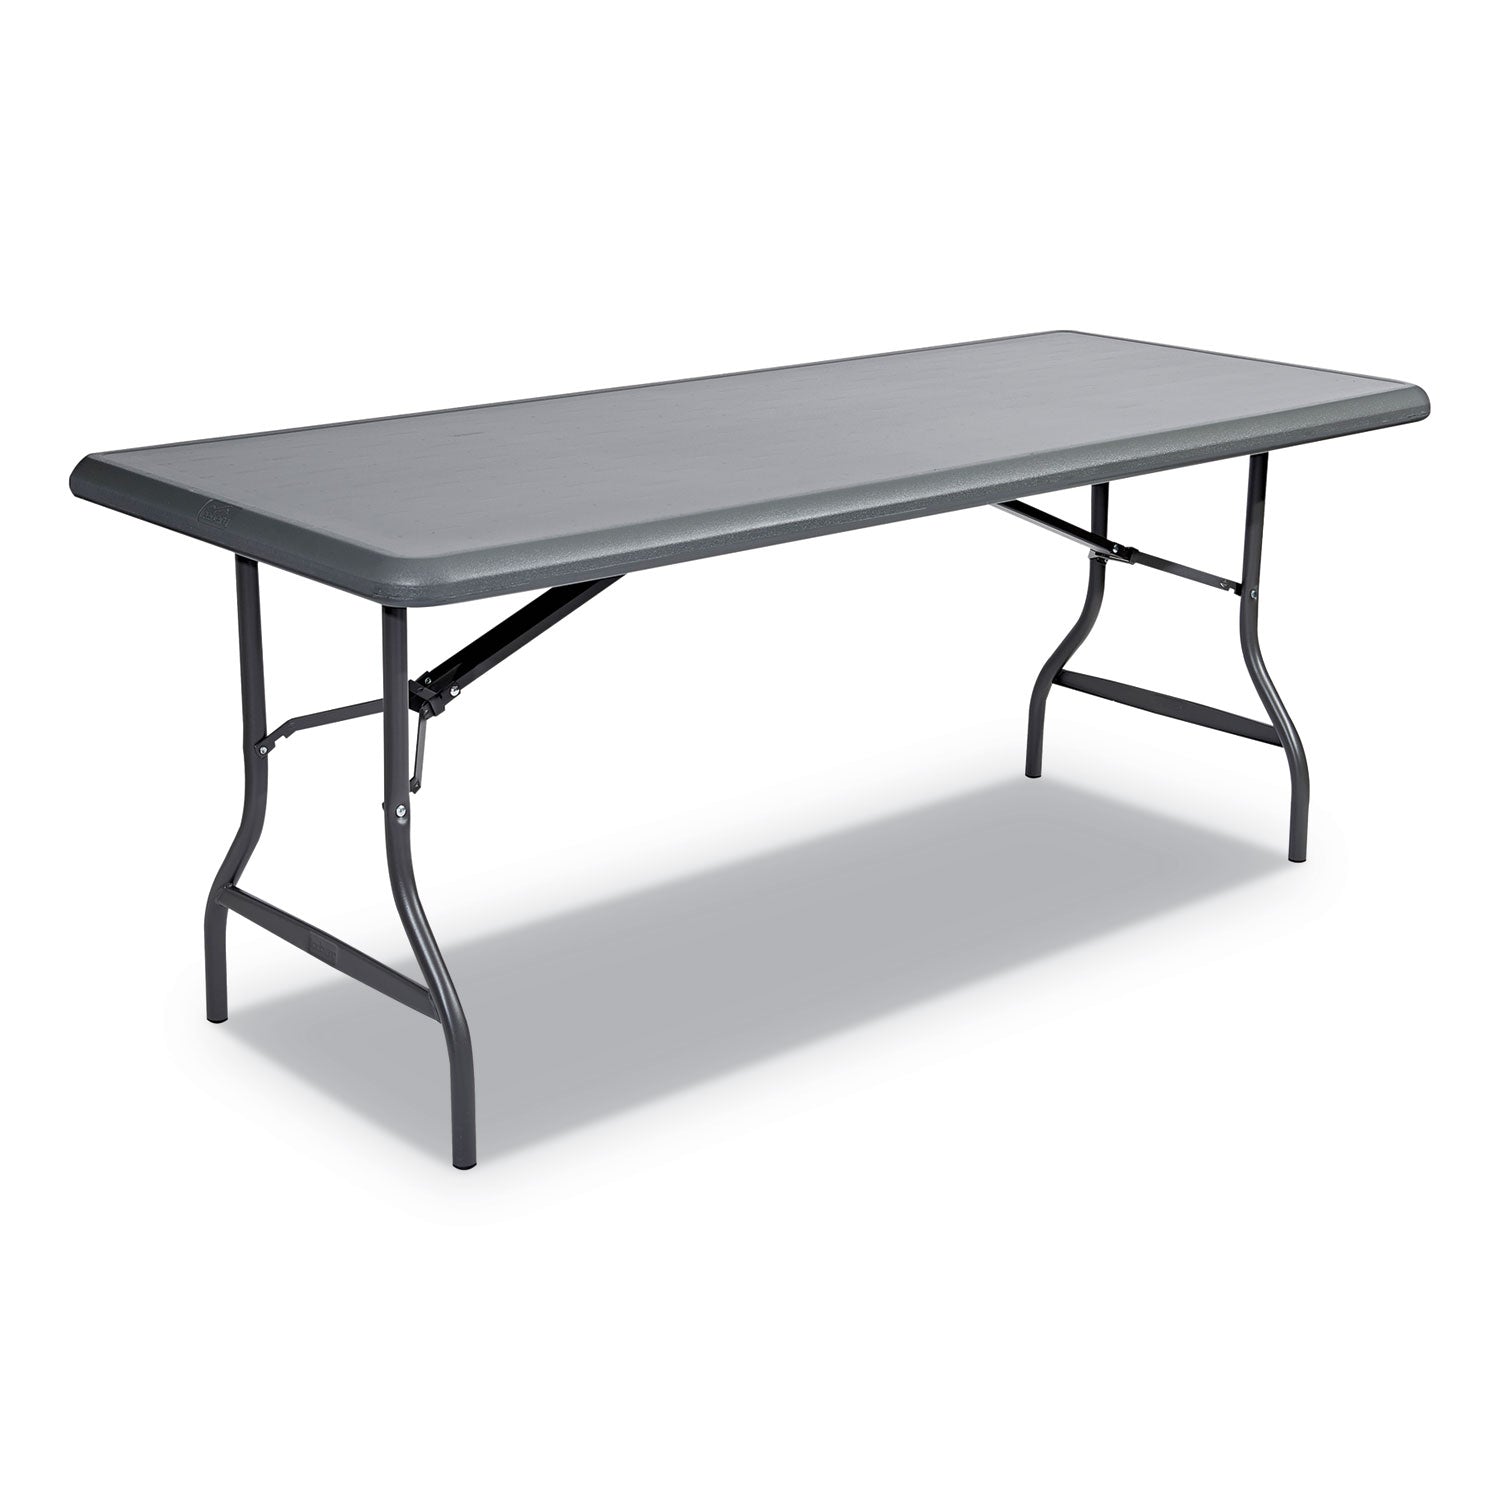 IndestrucTable Industrial Folding Table, Rectangular, 72" x 30" x 29", Charcoal - 